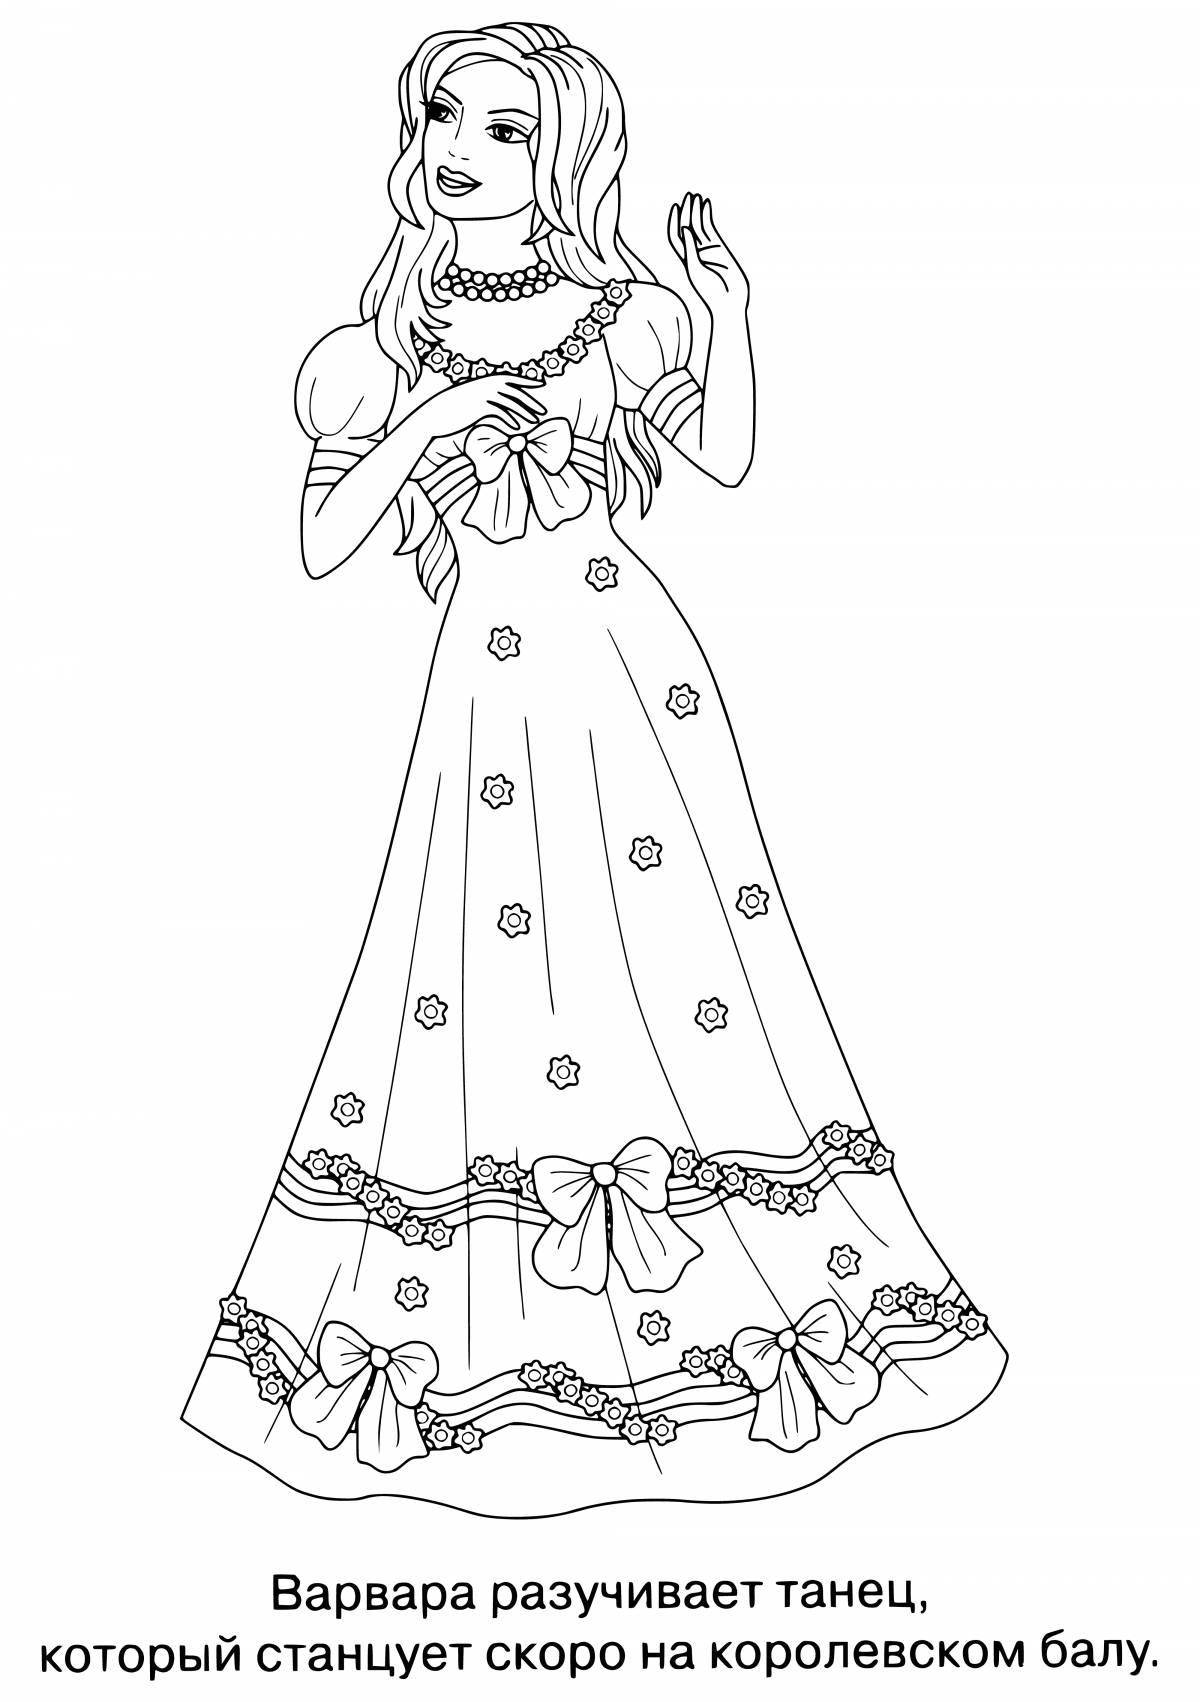 Charming coloring girl in a dress